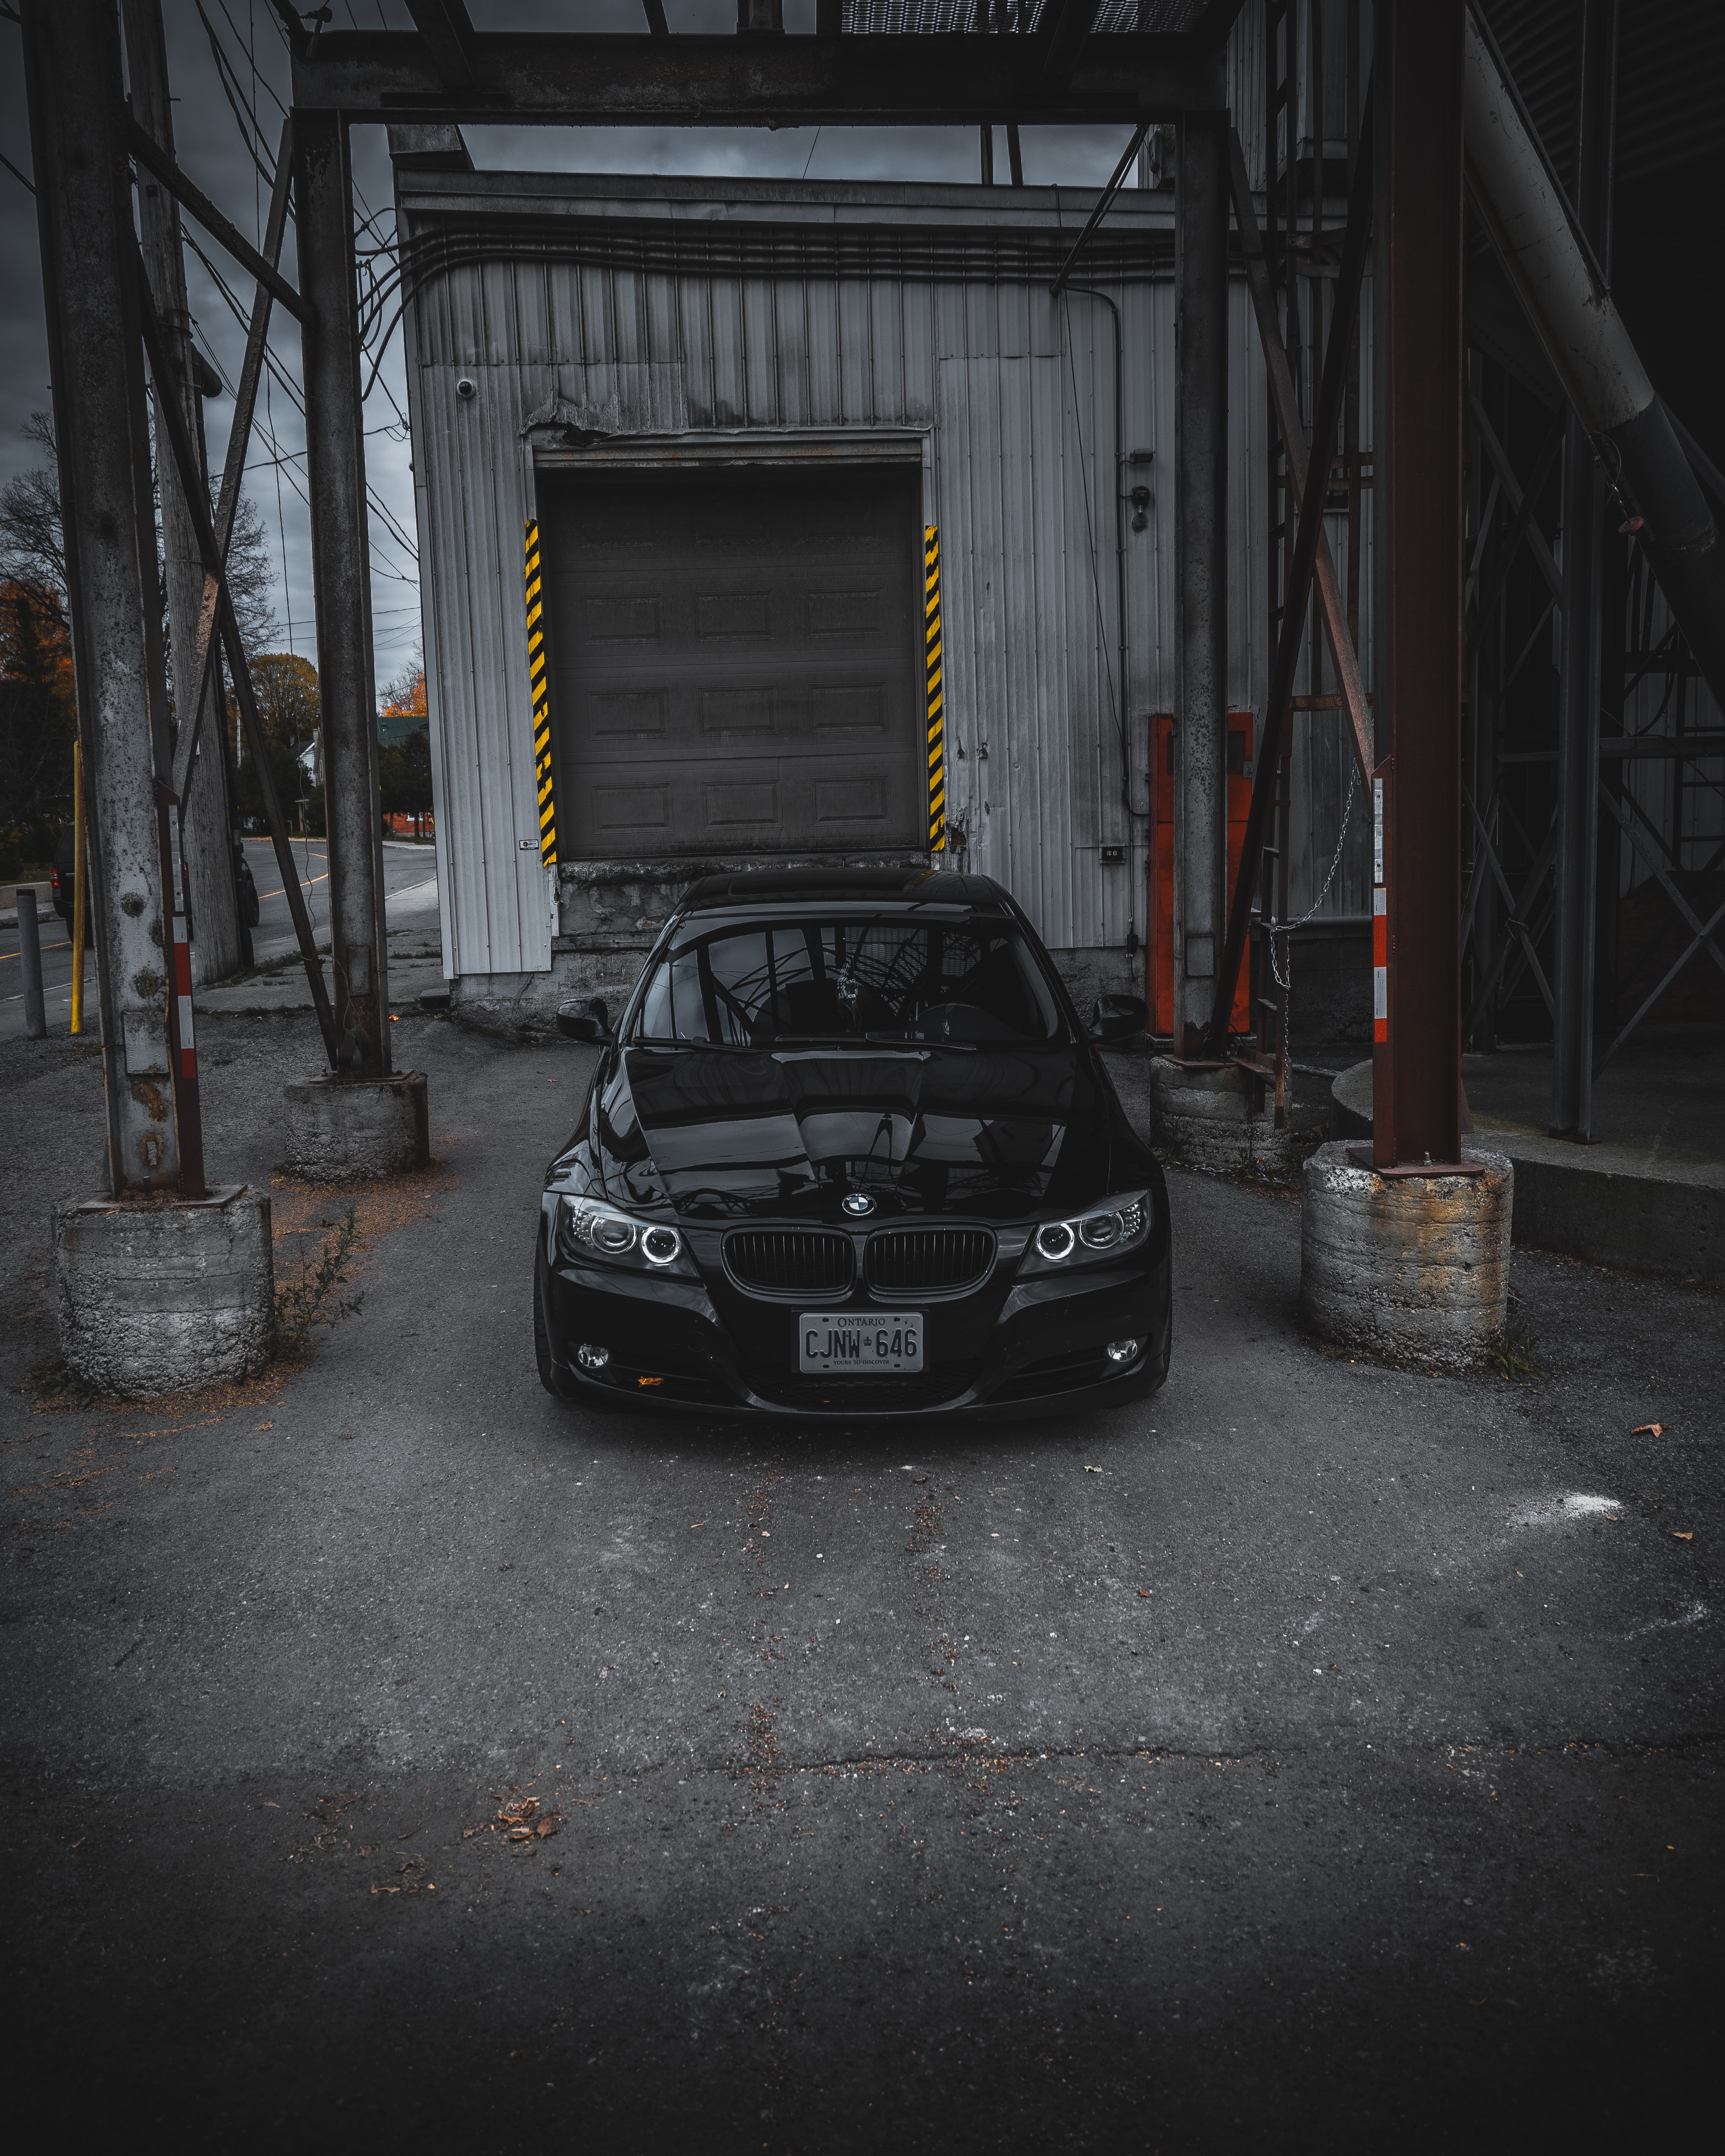 wallpapers bmw, car, cars, black, front view, garage